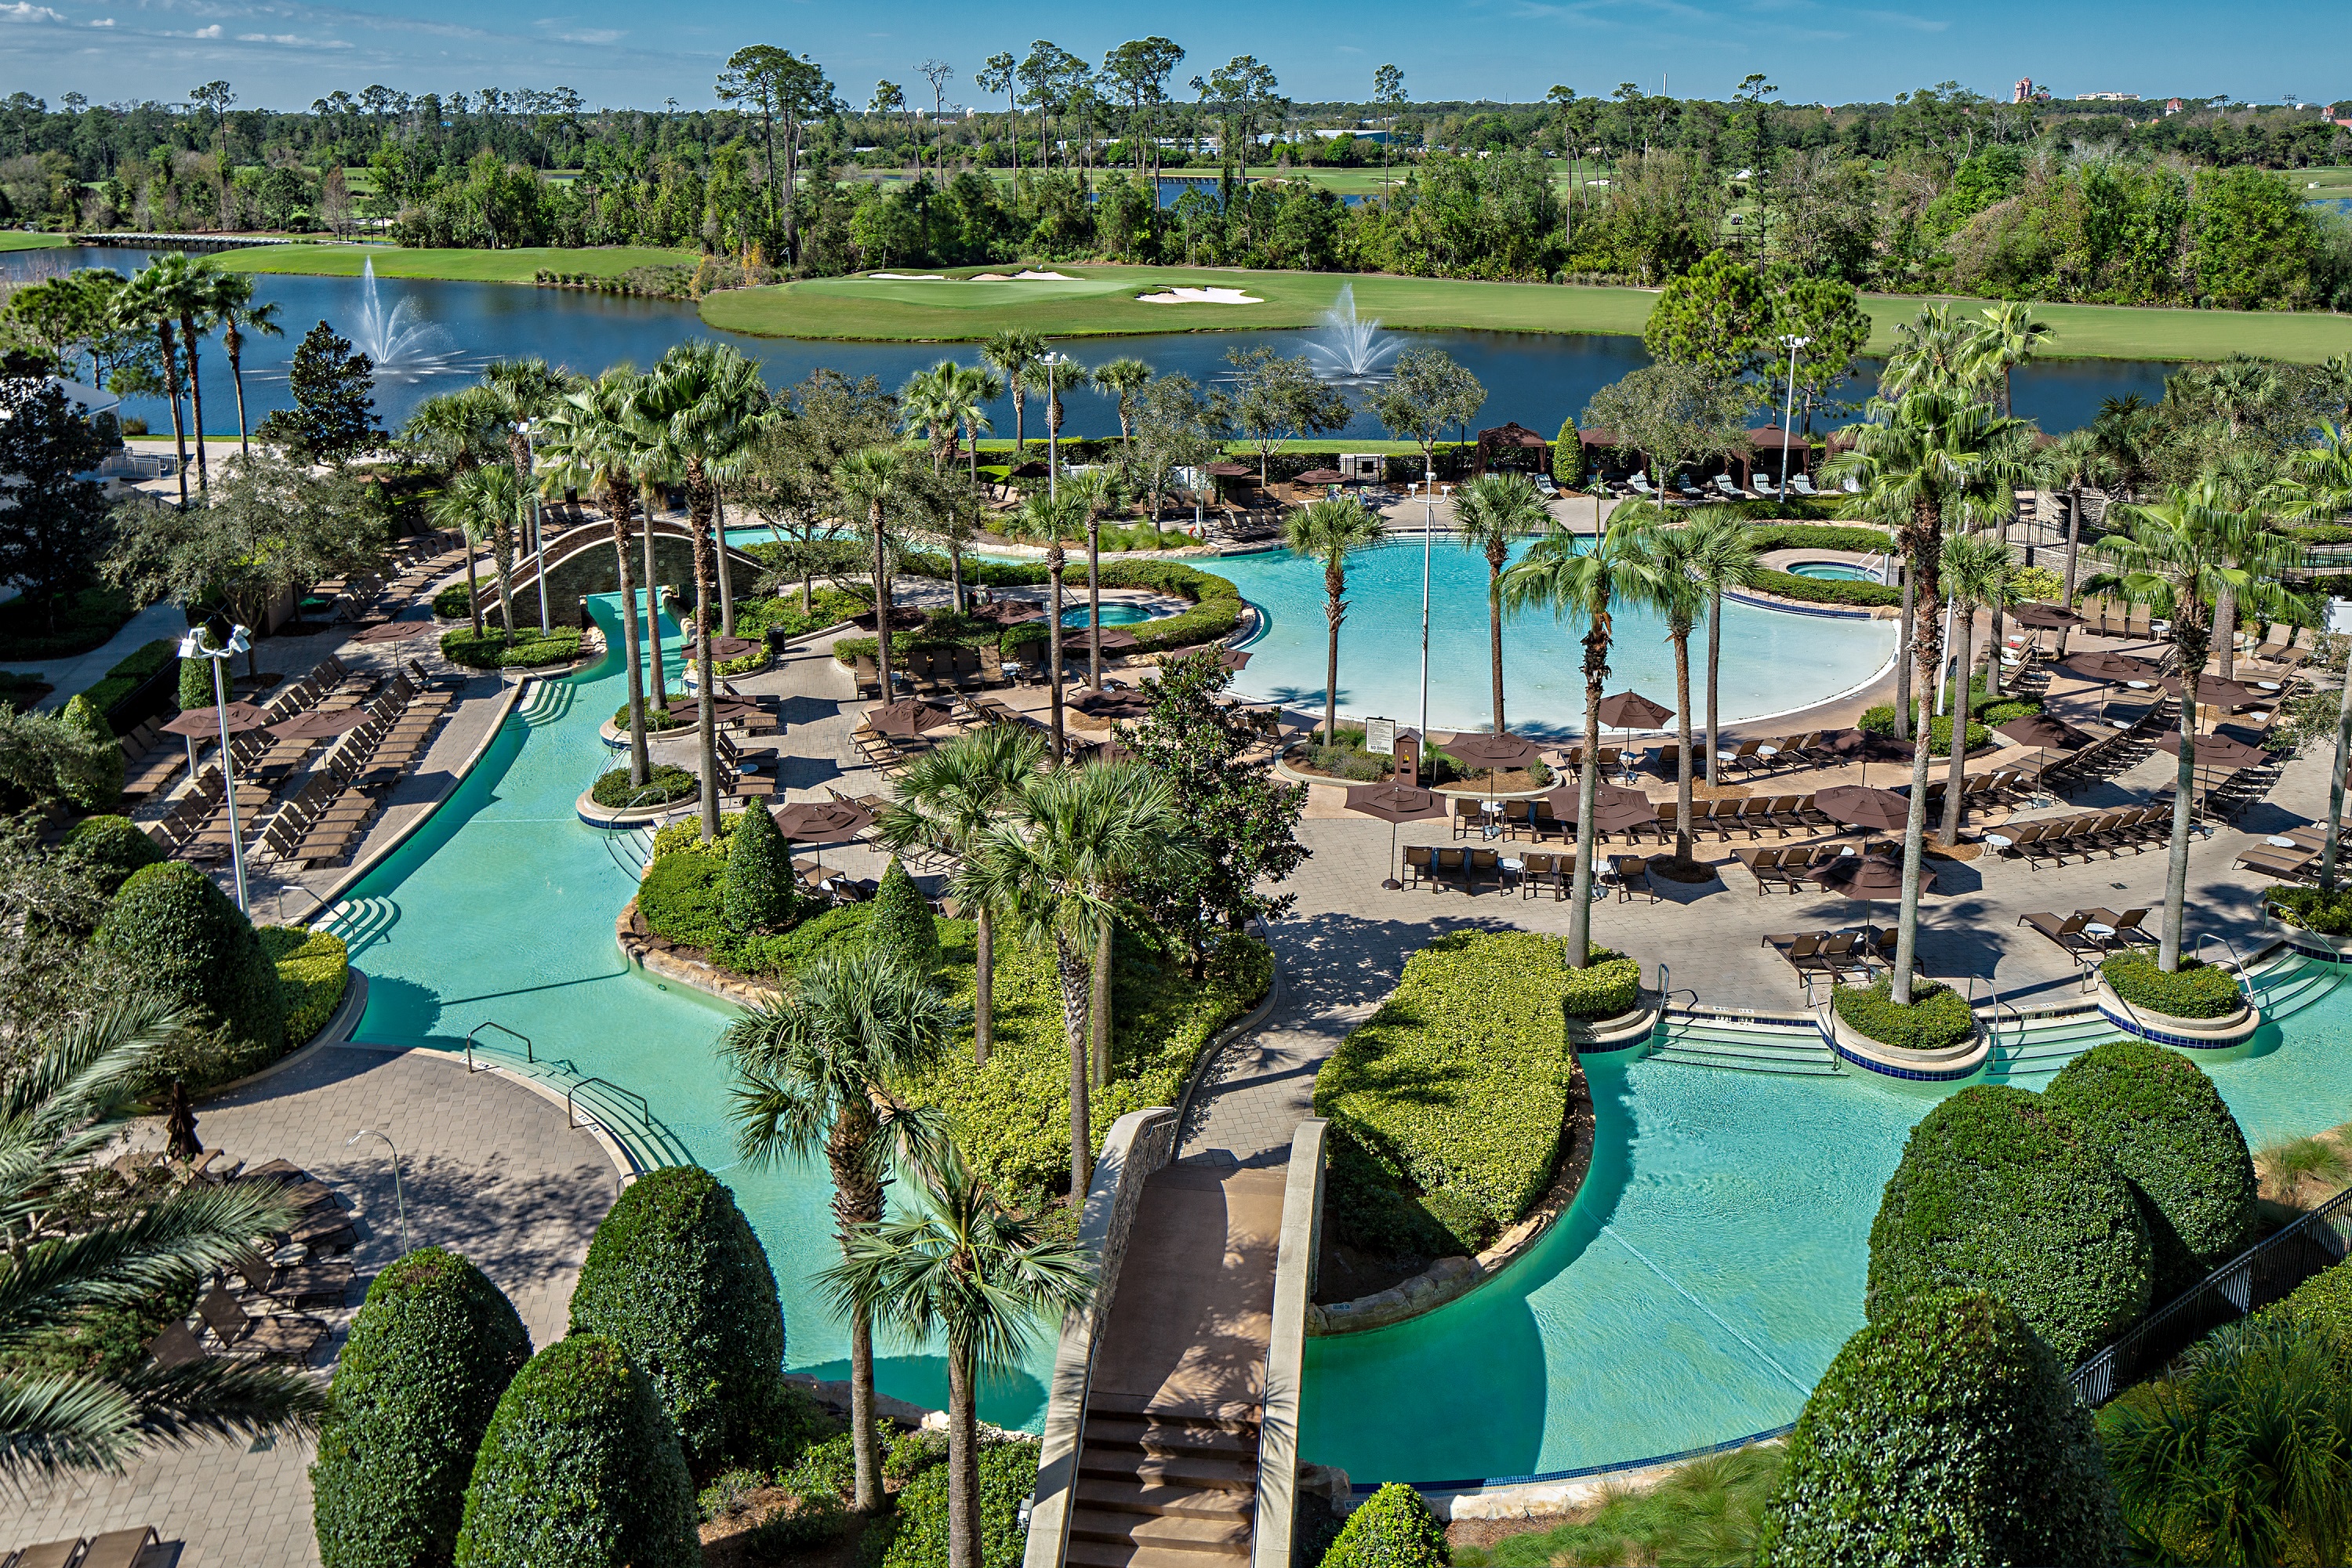 Lazy river pool features of Signia by Hilton Orlando